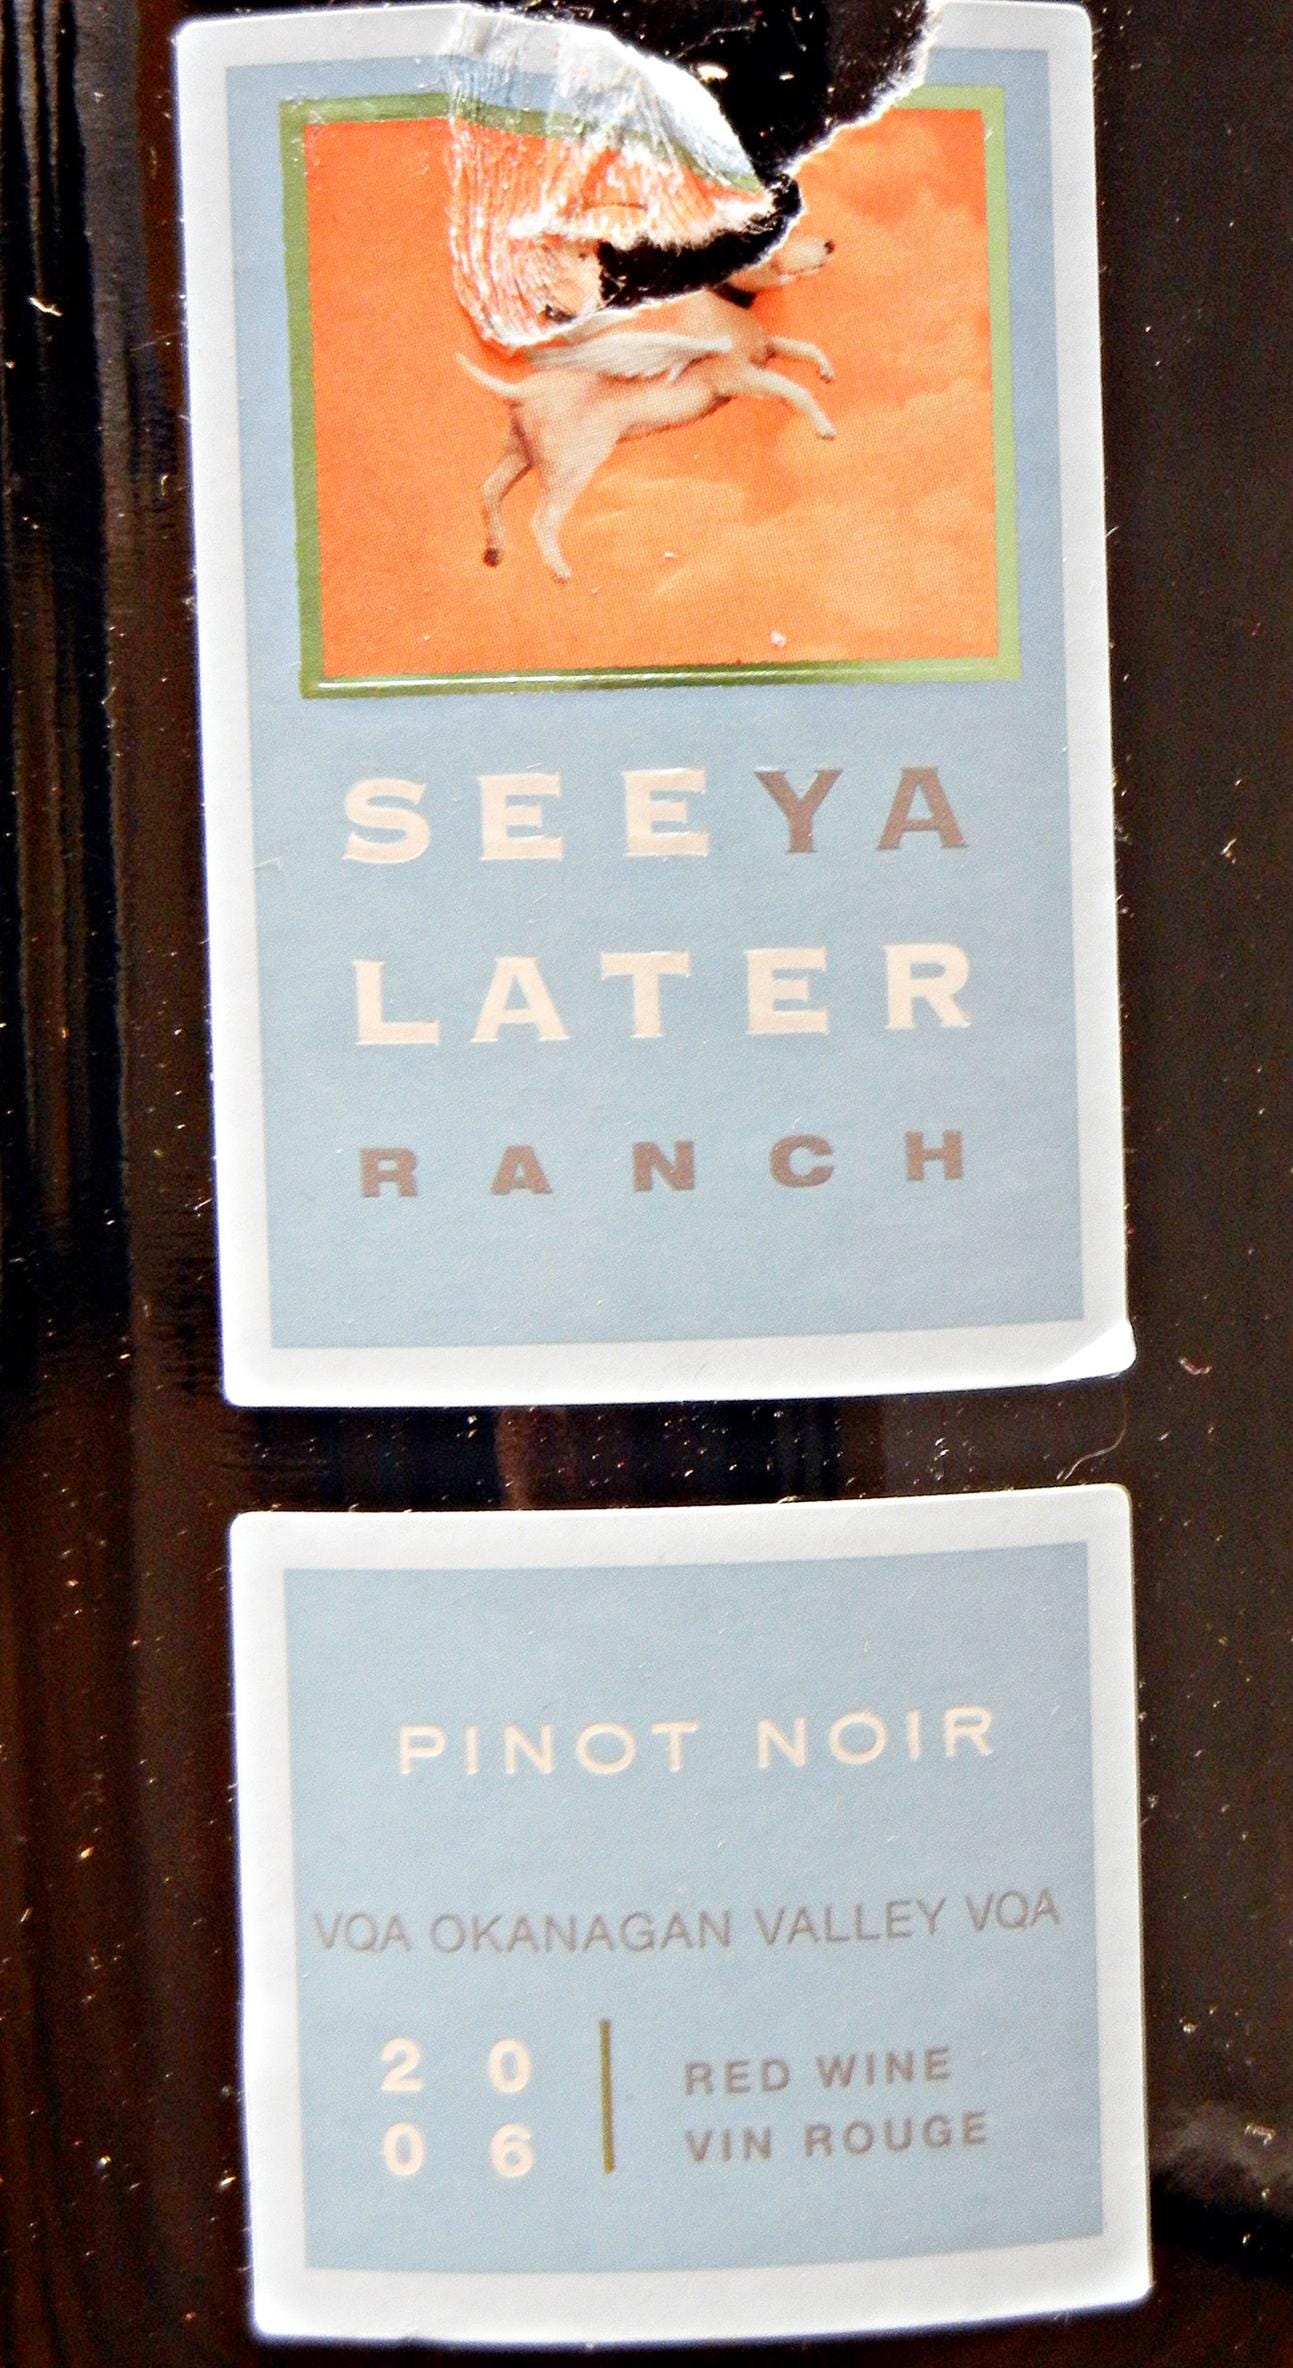 See Ya Later Pinot Noir 2006 Label - BC Pinot Noir Tasting Review 1